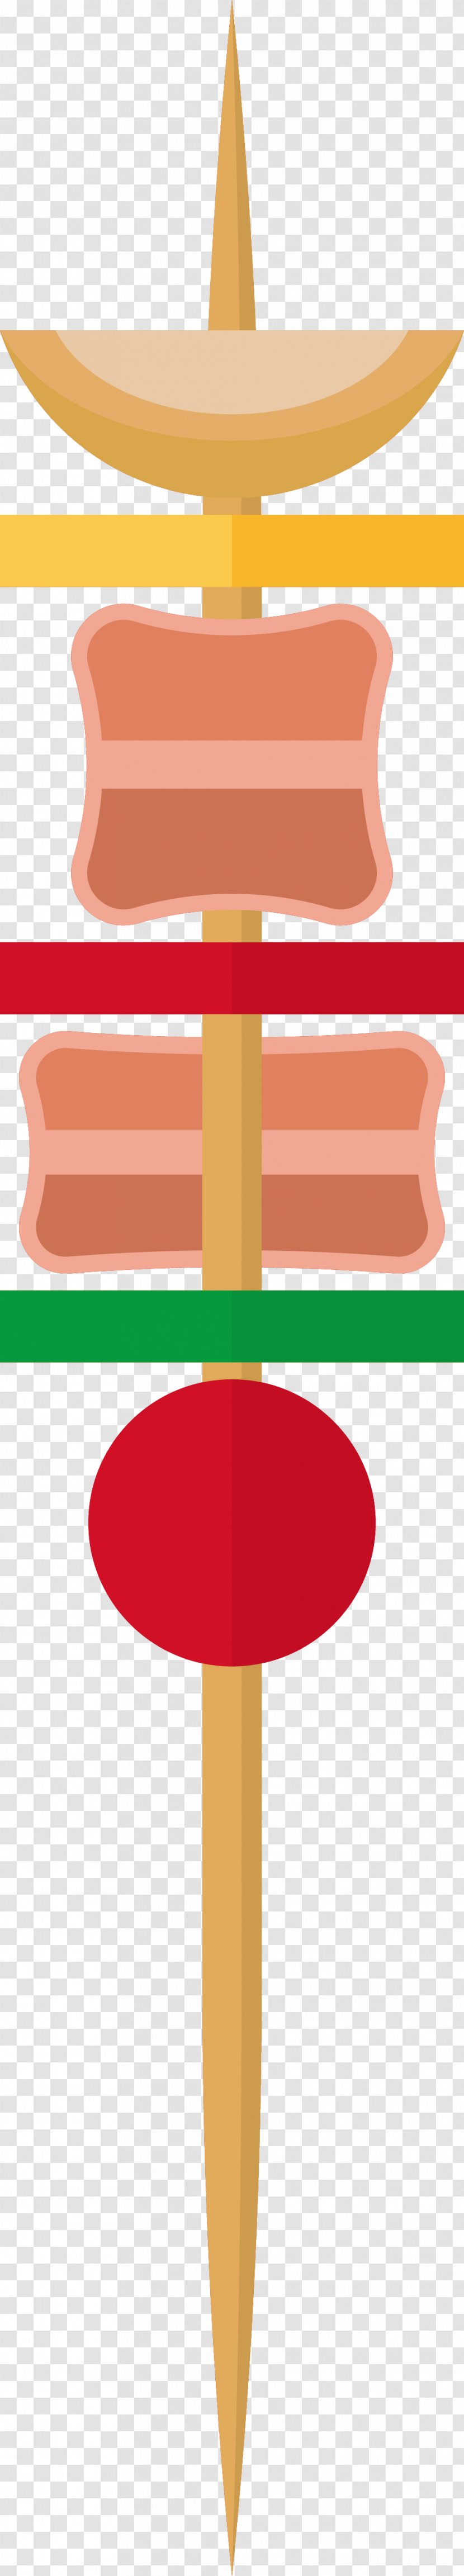 Text Illustration - Meat - Bamboo Barbecue Transparent PNG